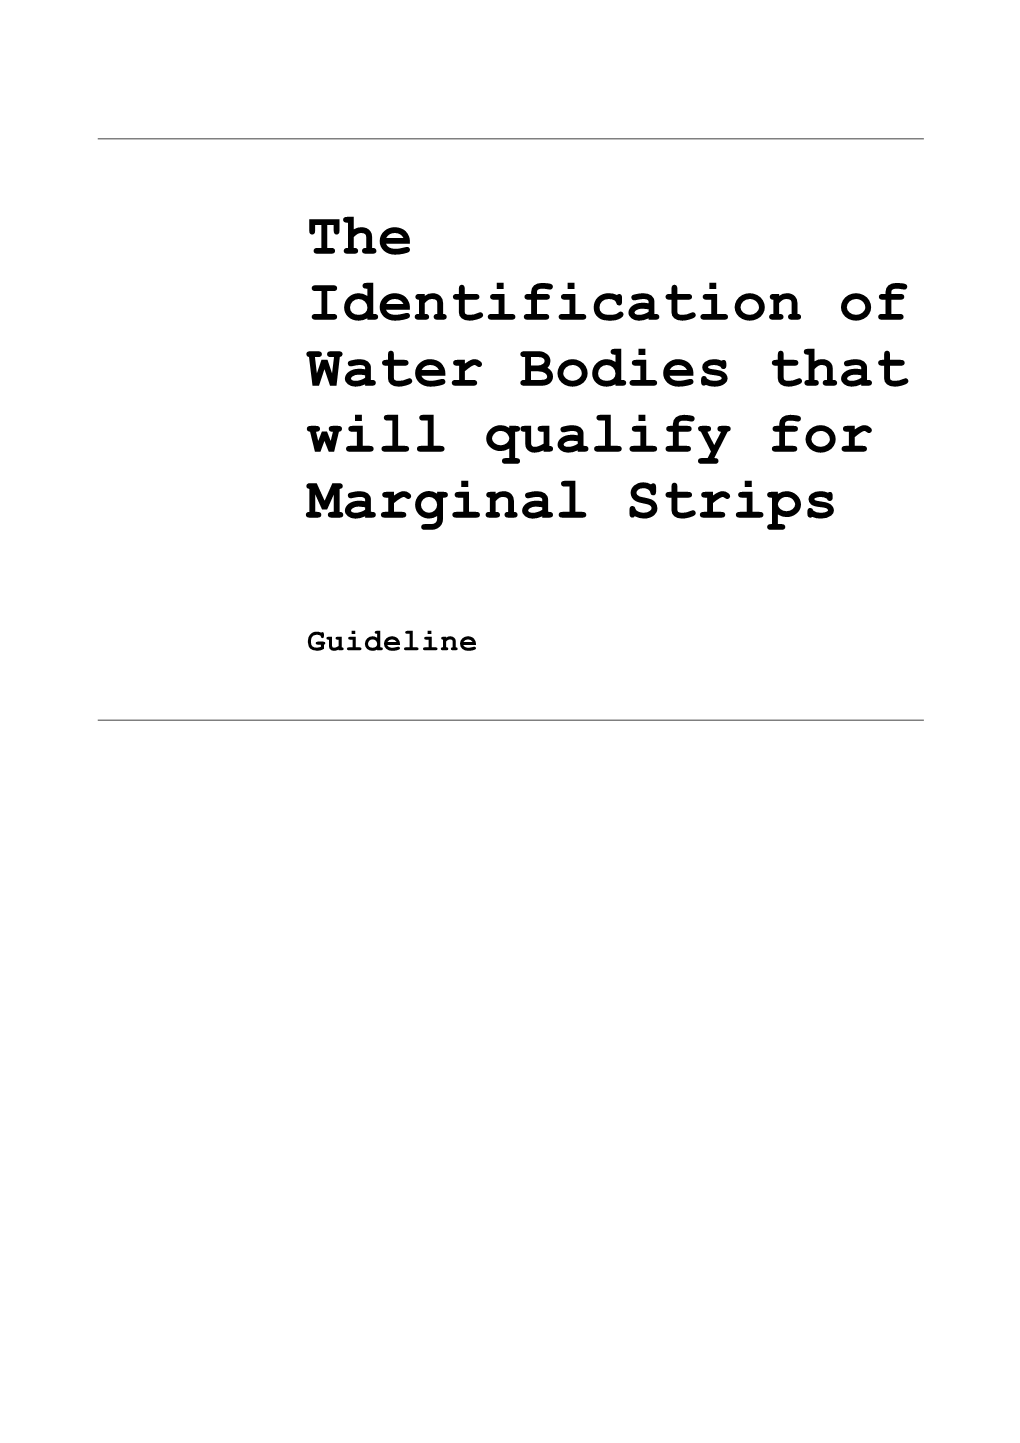 The Identification of Water Bodies That Will Qualify for Marginal Strips